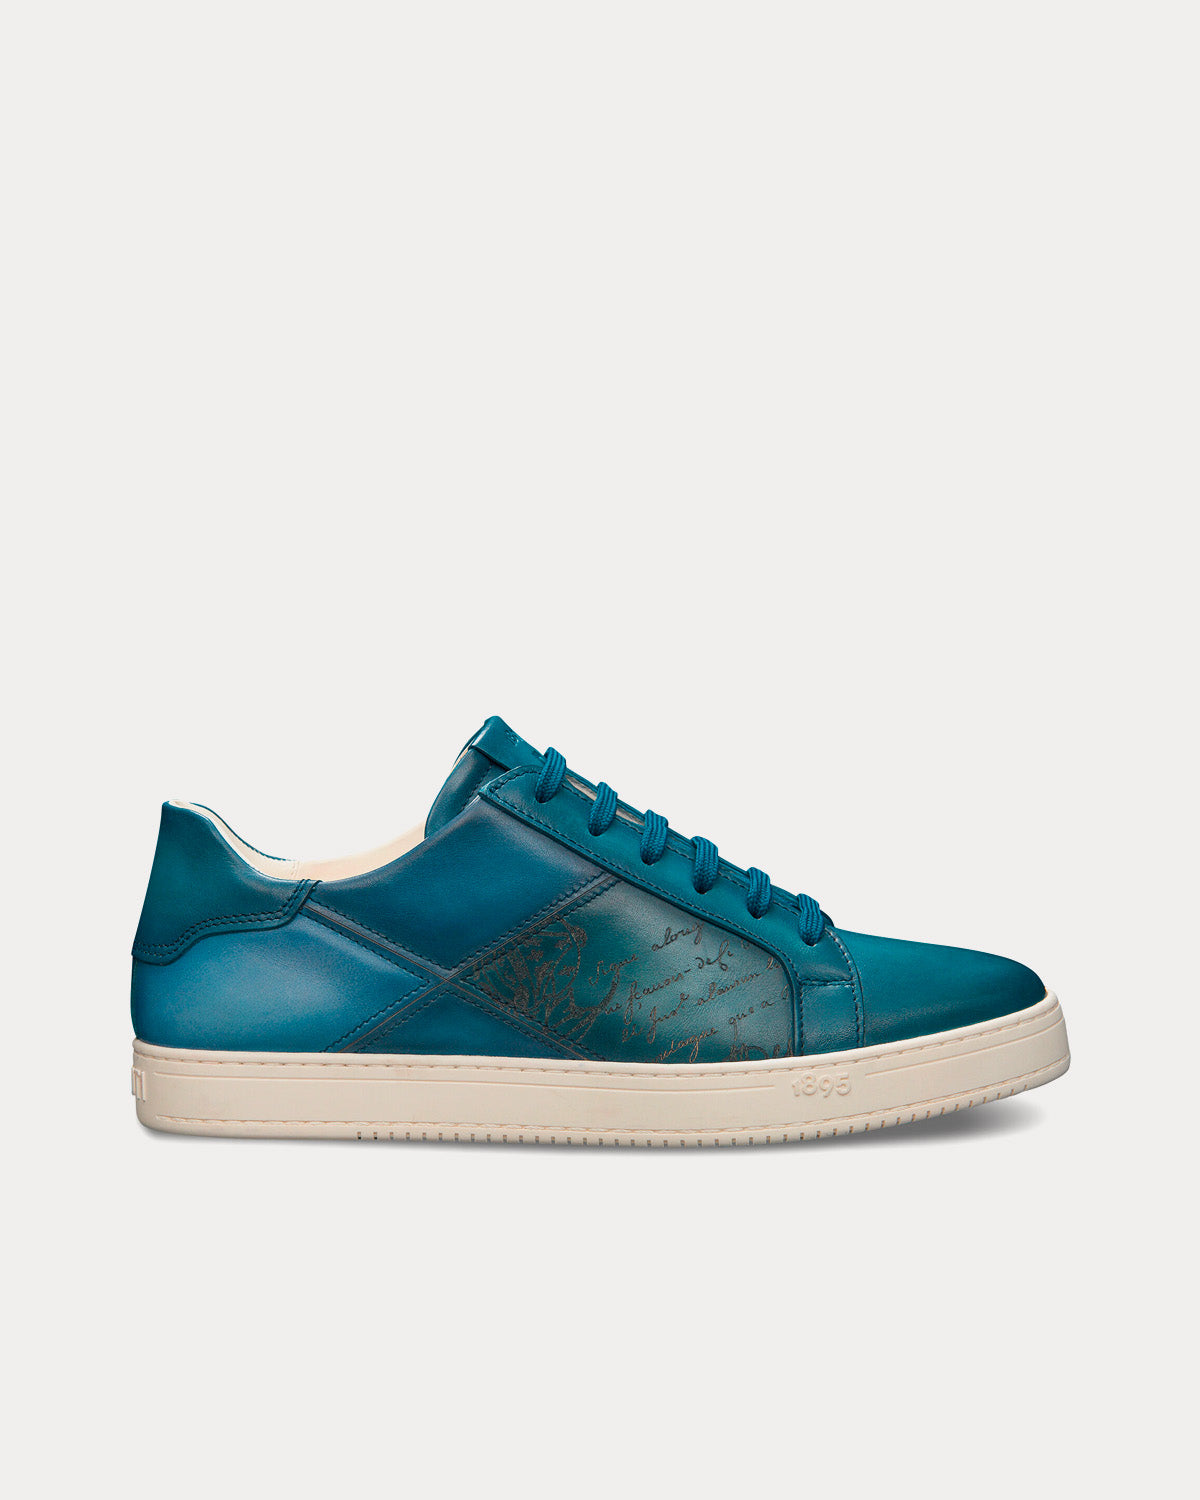 Berluti - Playtime Patchwork Scritto Leather Aveiro Low Top Sneakers